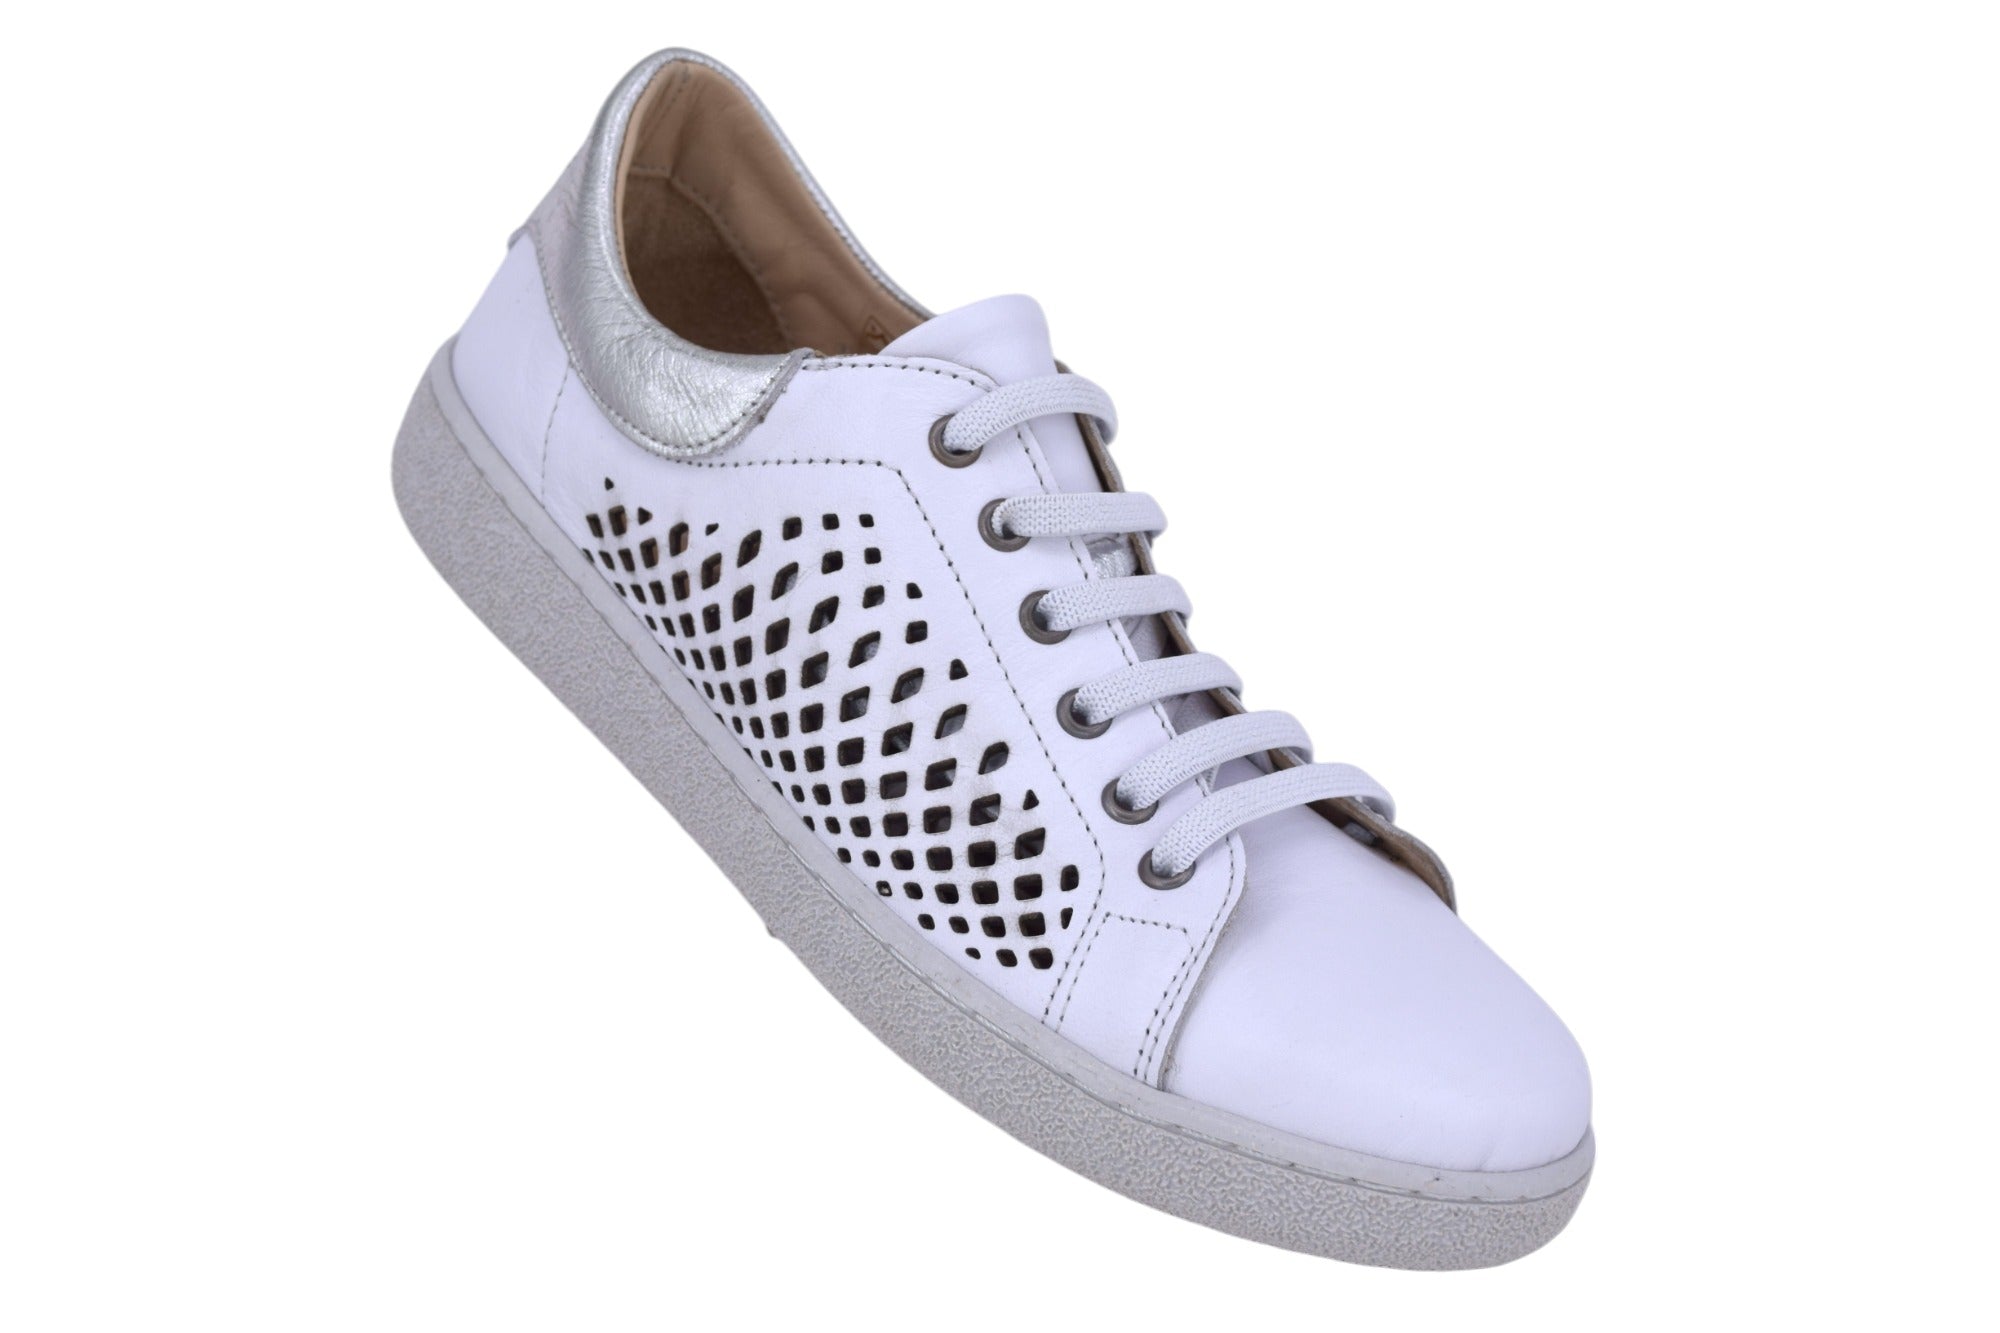 Rilassare Tabbs Lace Up Leather Sneaker - Women's